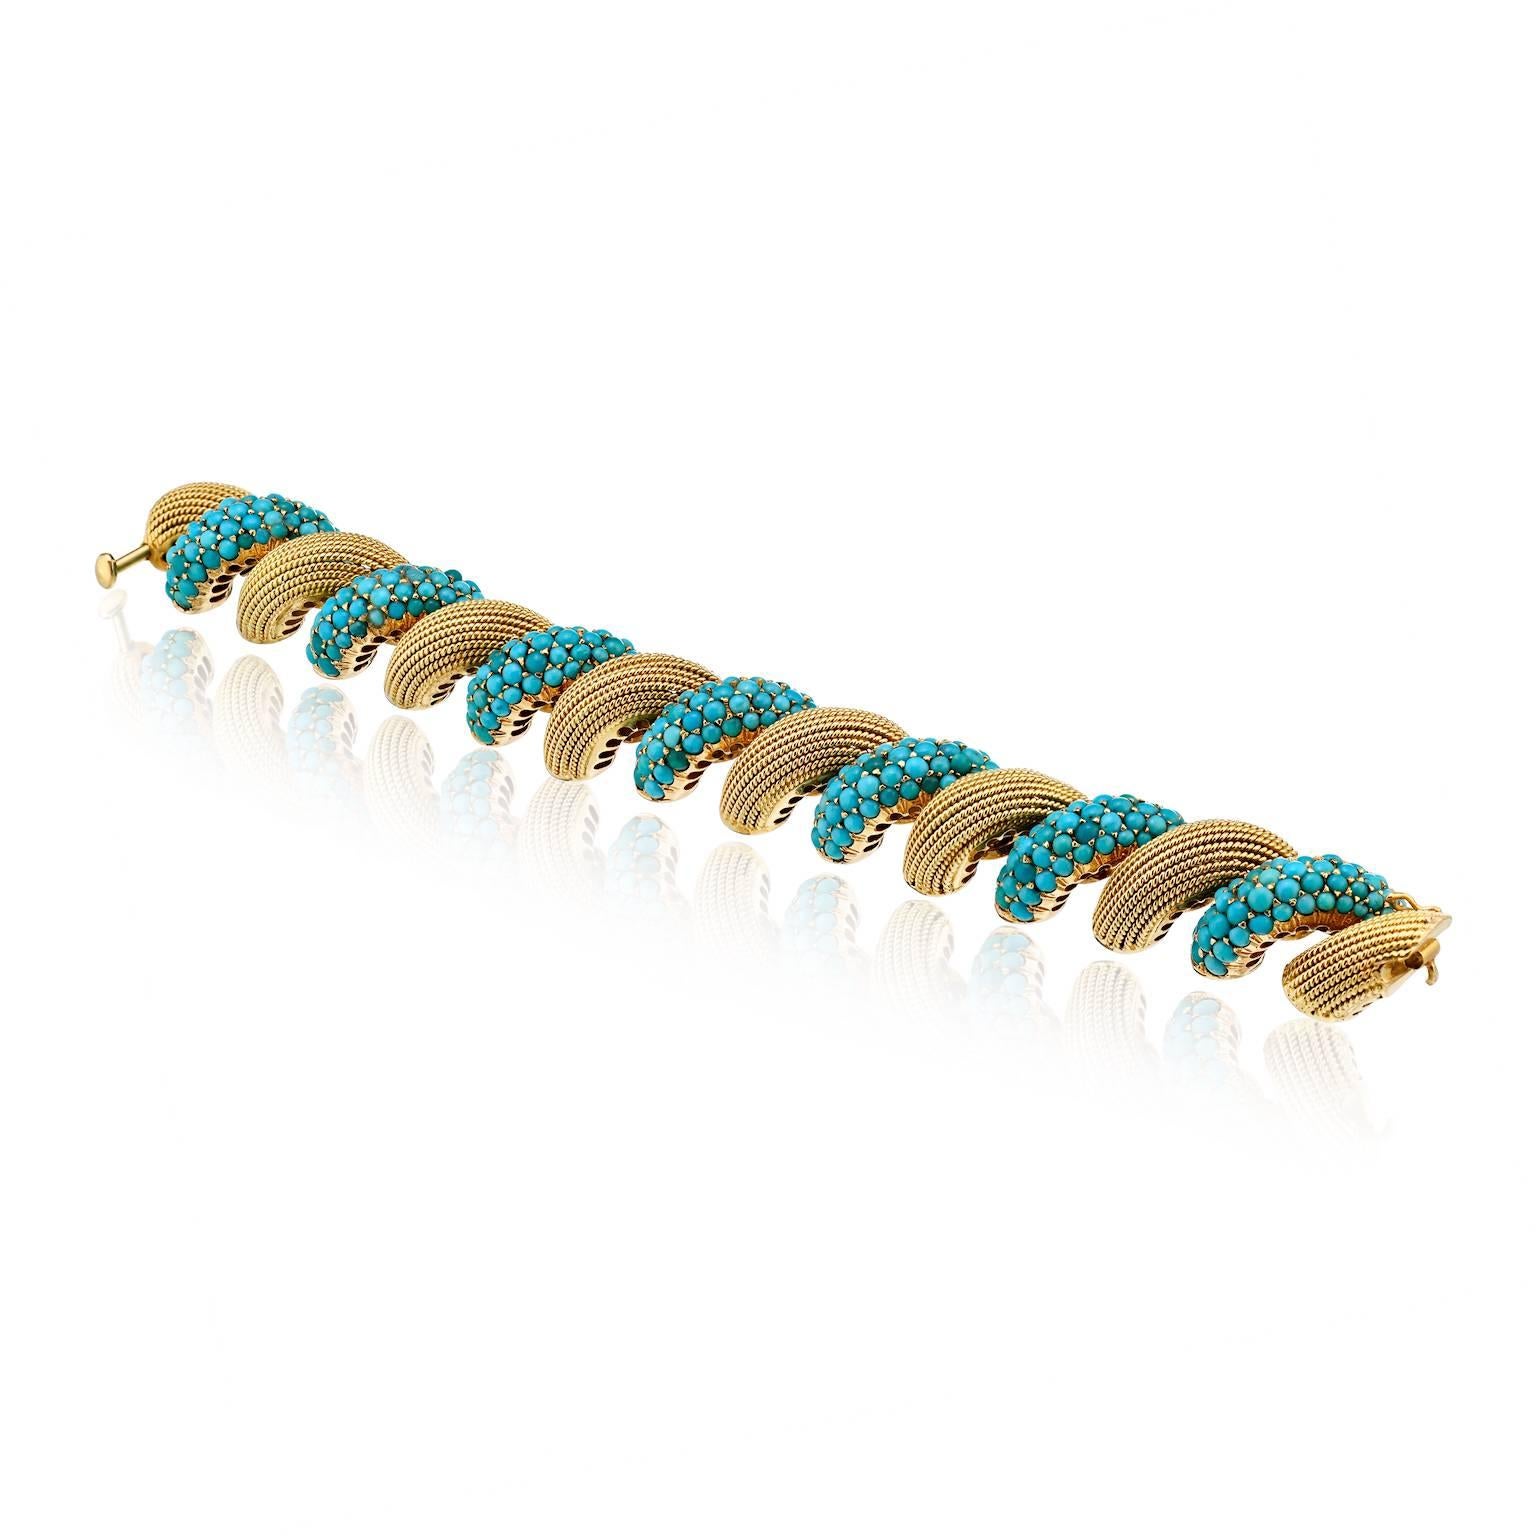 Cartier Circa 1970s 18K Yellow Gold with Turquoise Bracelet